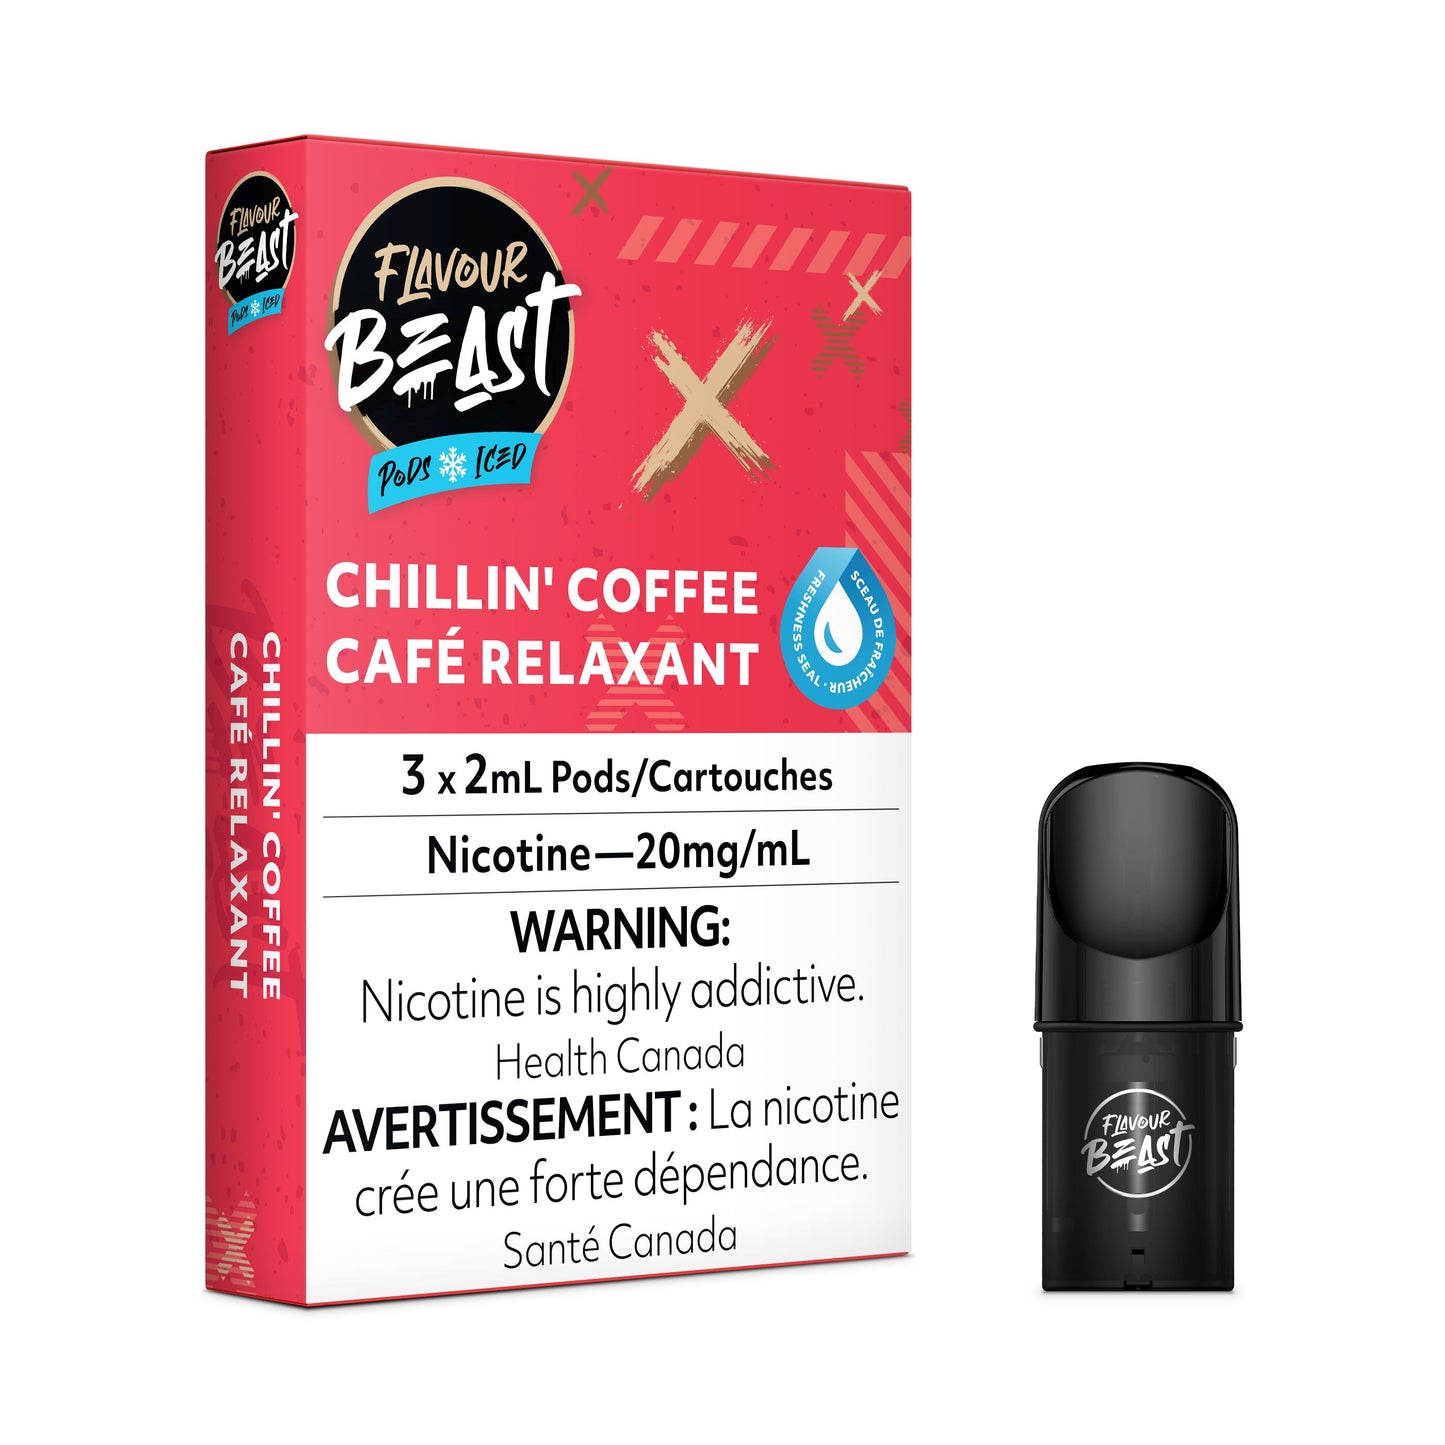 Chillin' Coffee Iced - FB CLOSED PODS Flavour Beast Flow 